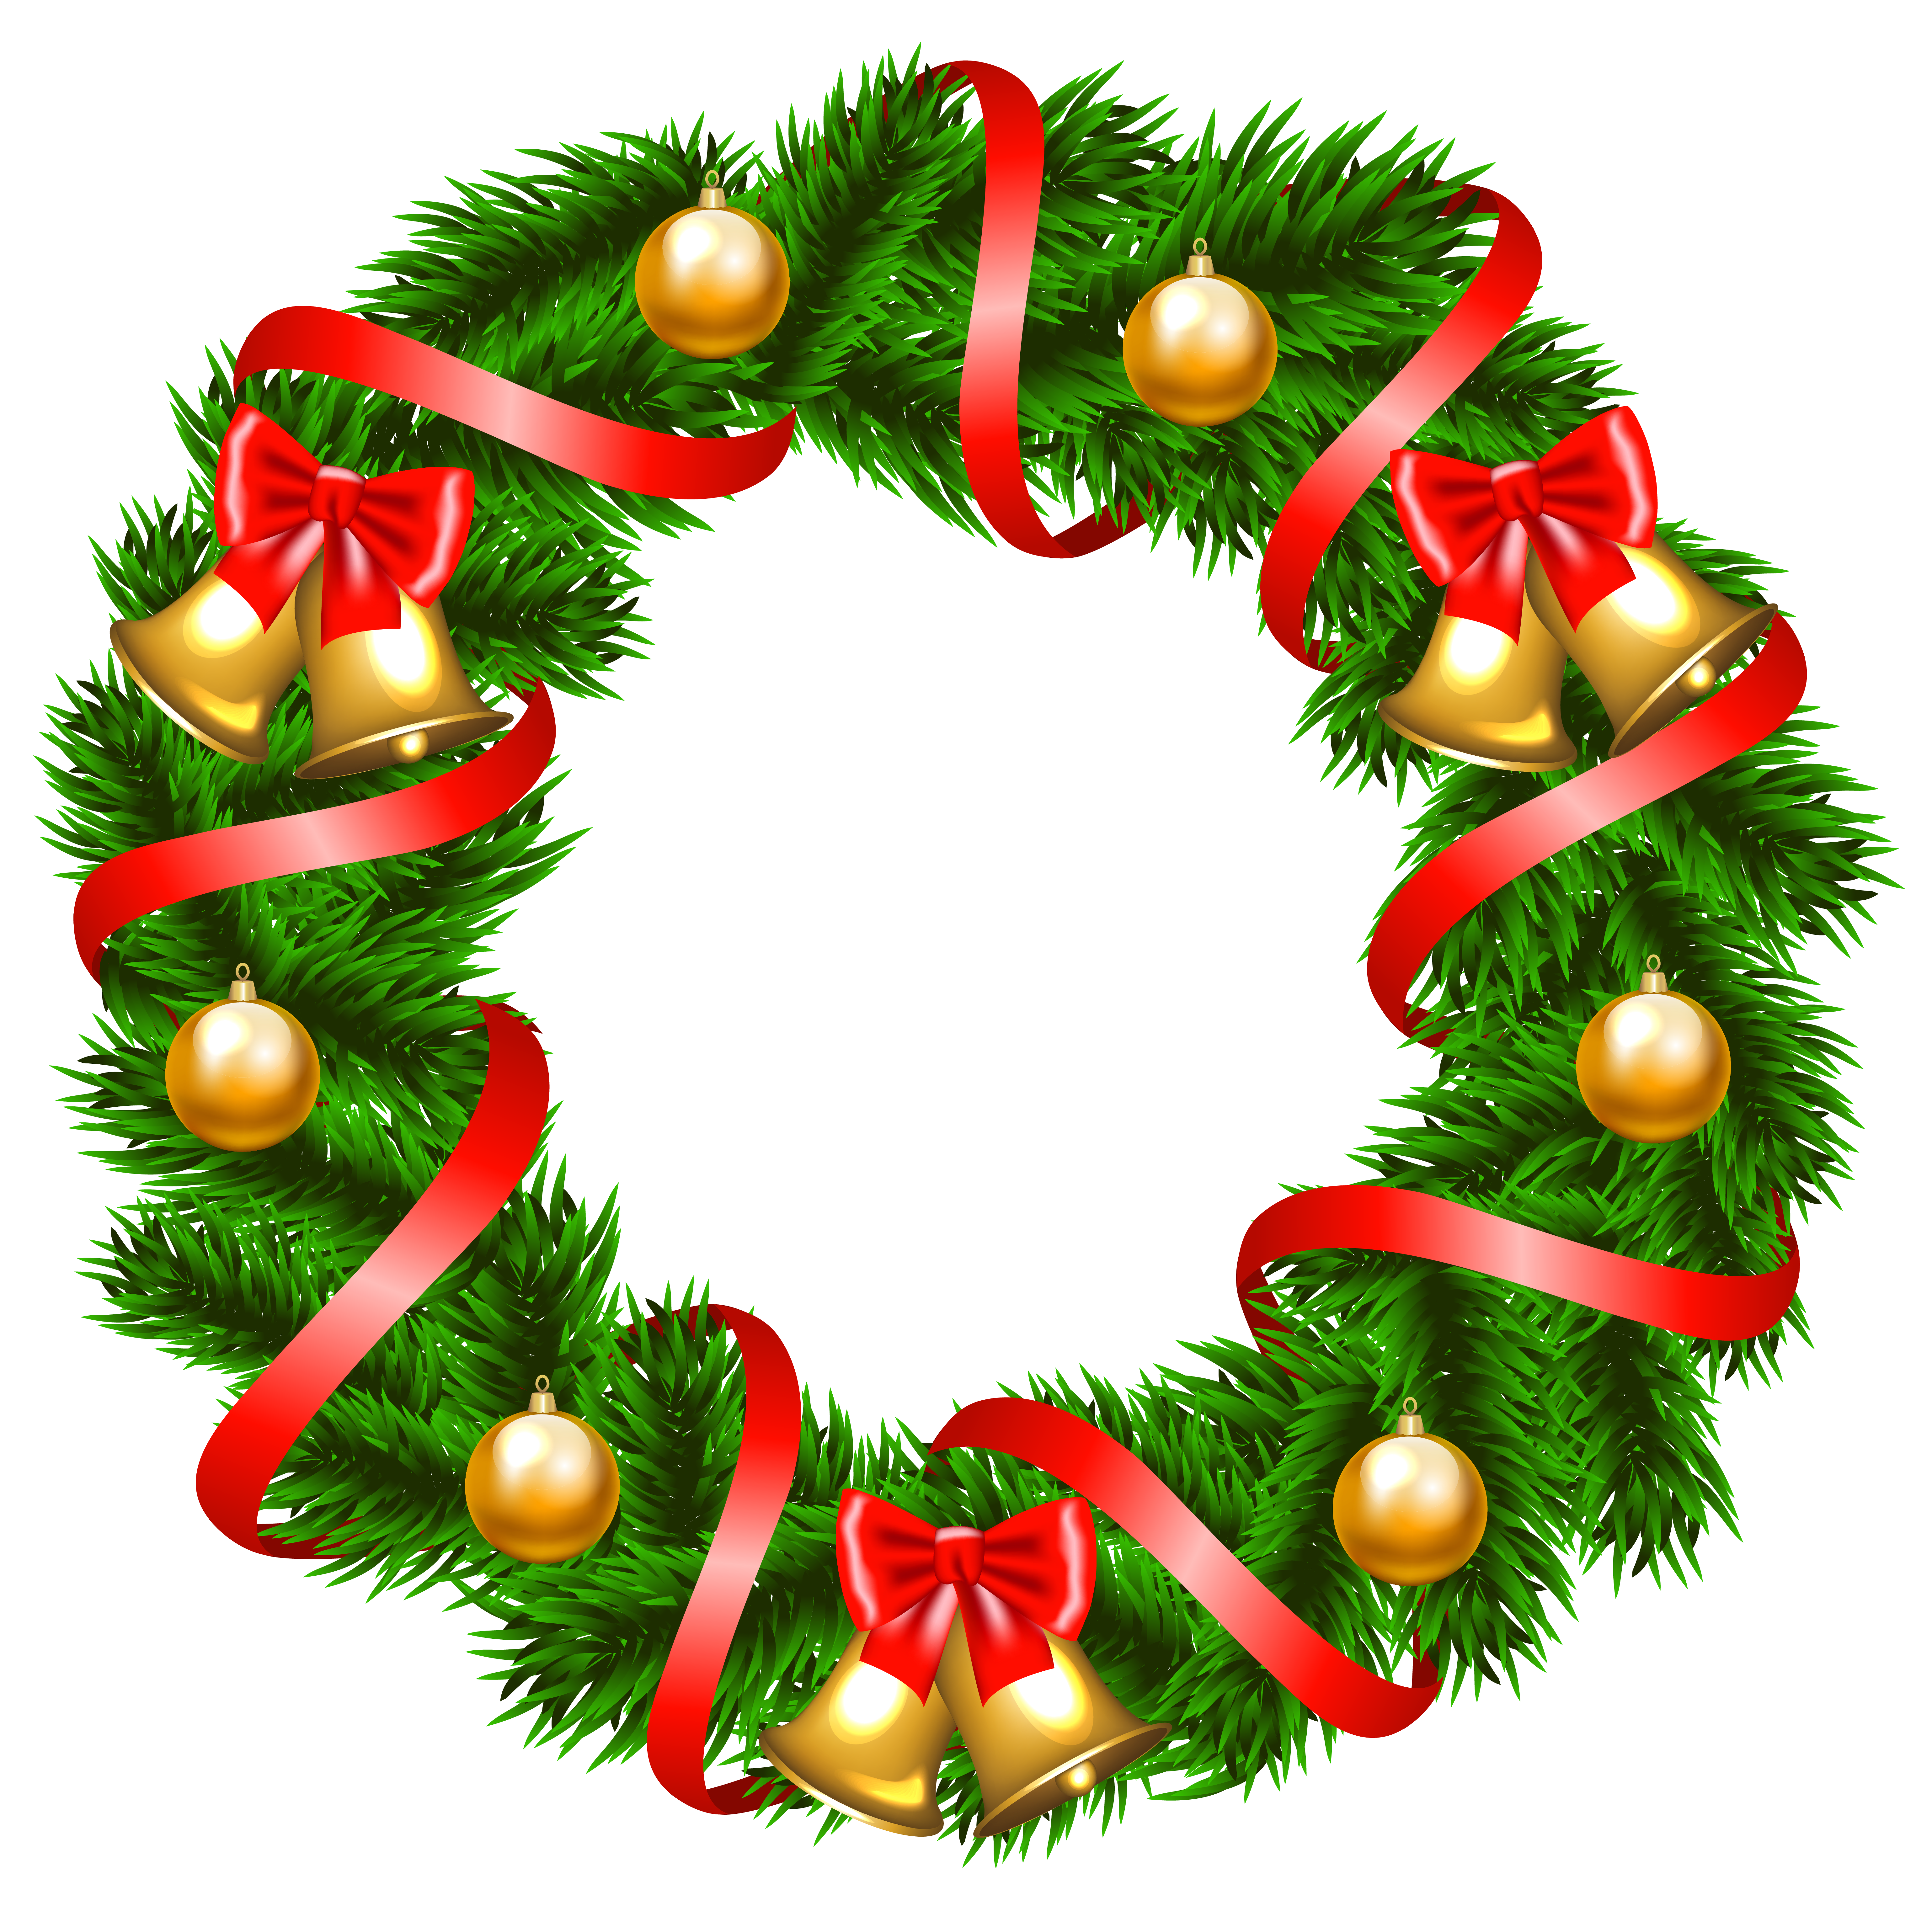 Decorative Christmas Wreath PNG Clipart Image.